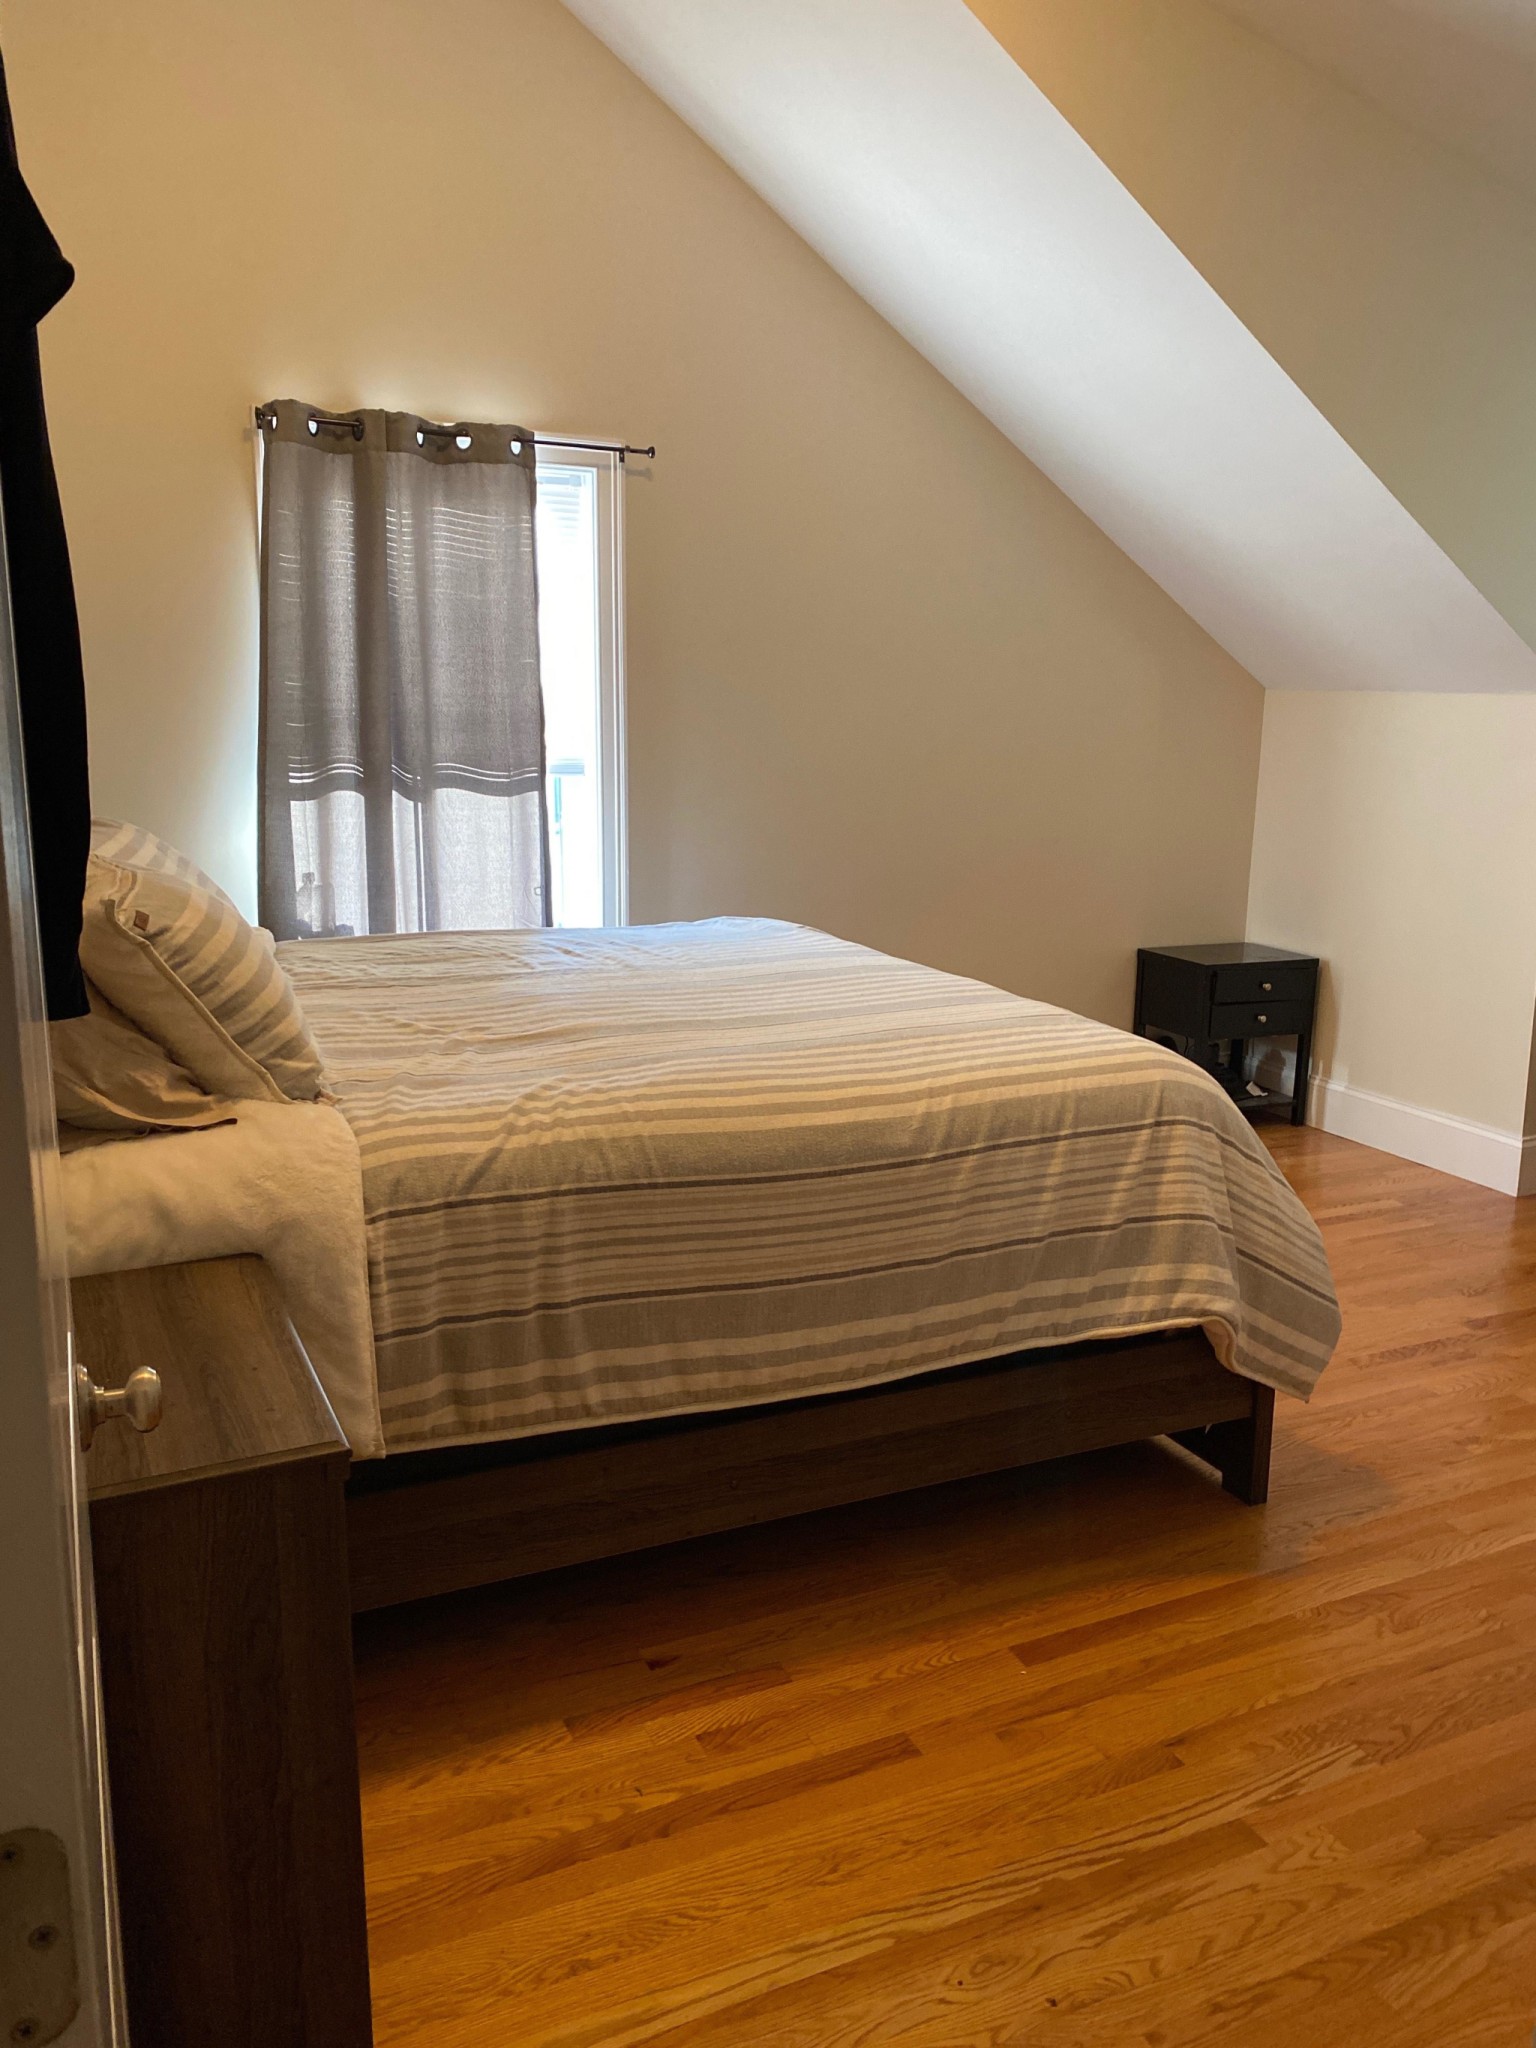 2 Beds, 1.5 Baths apartment in Boston, Dorchester for $2,500